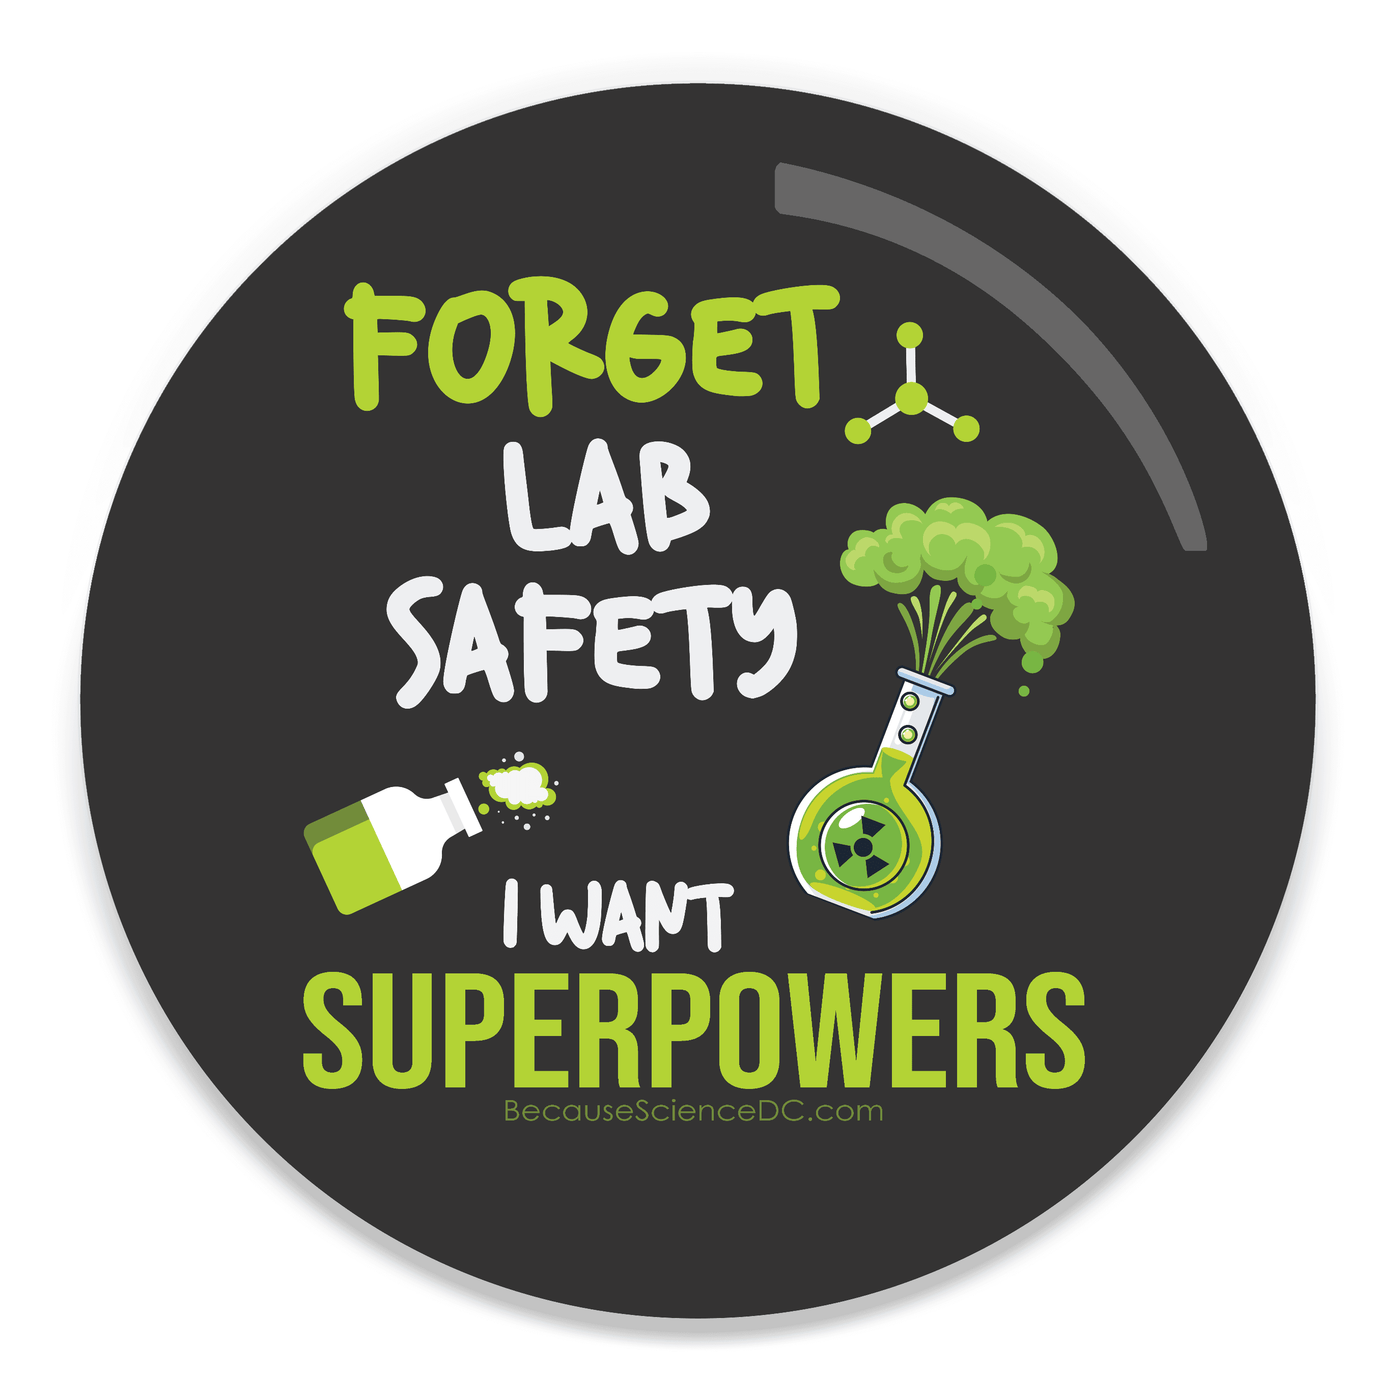 2.25 inch round colorful magnet with image of a chemistry flask and text about wanting superpowers